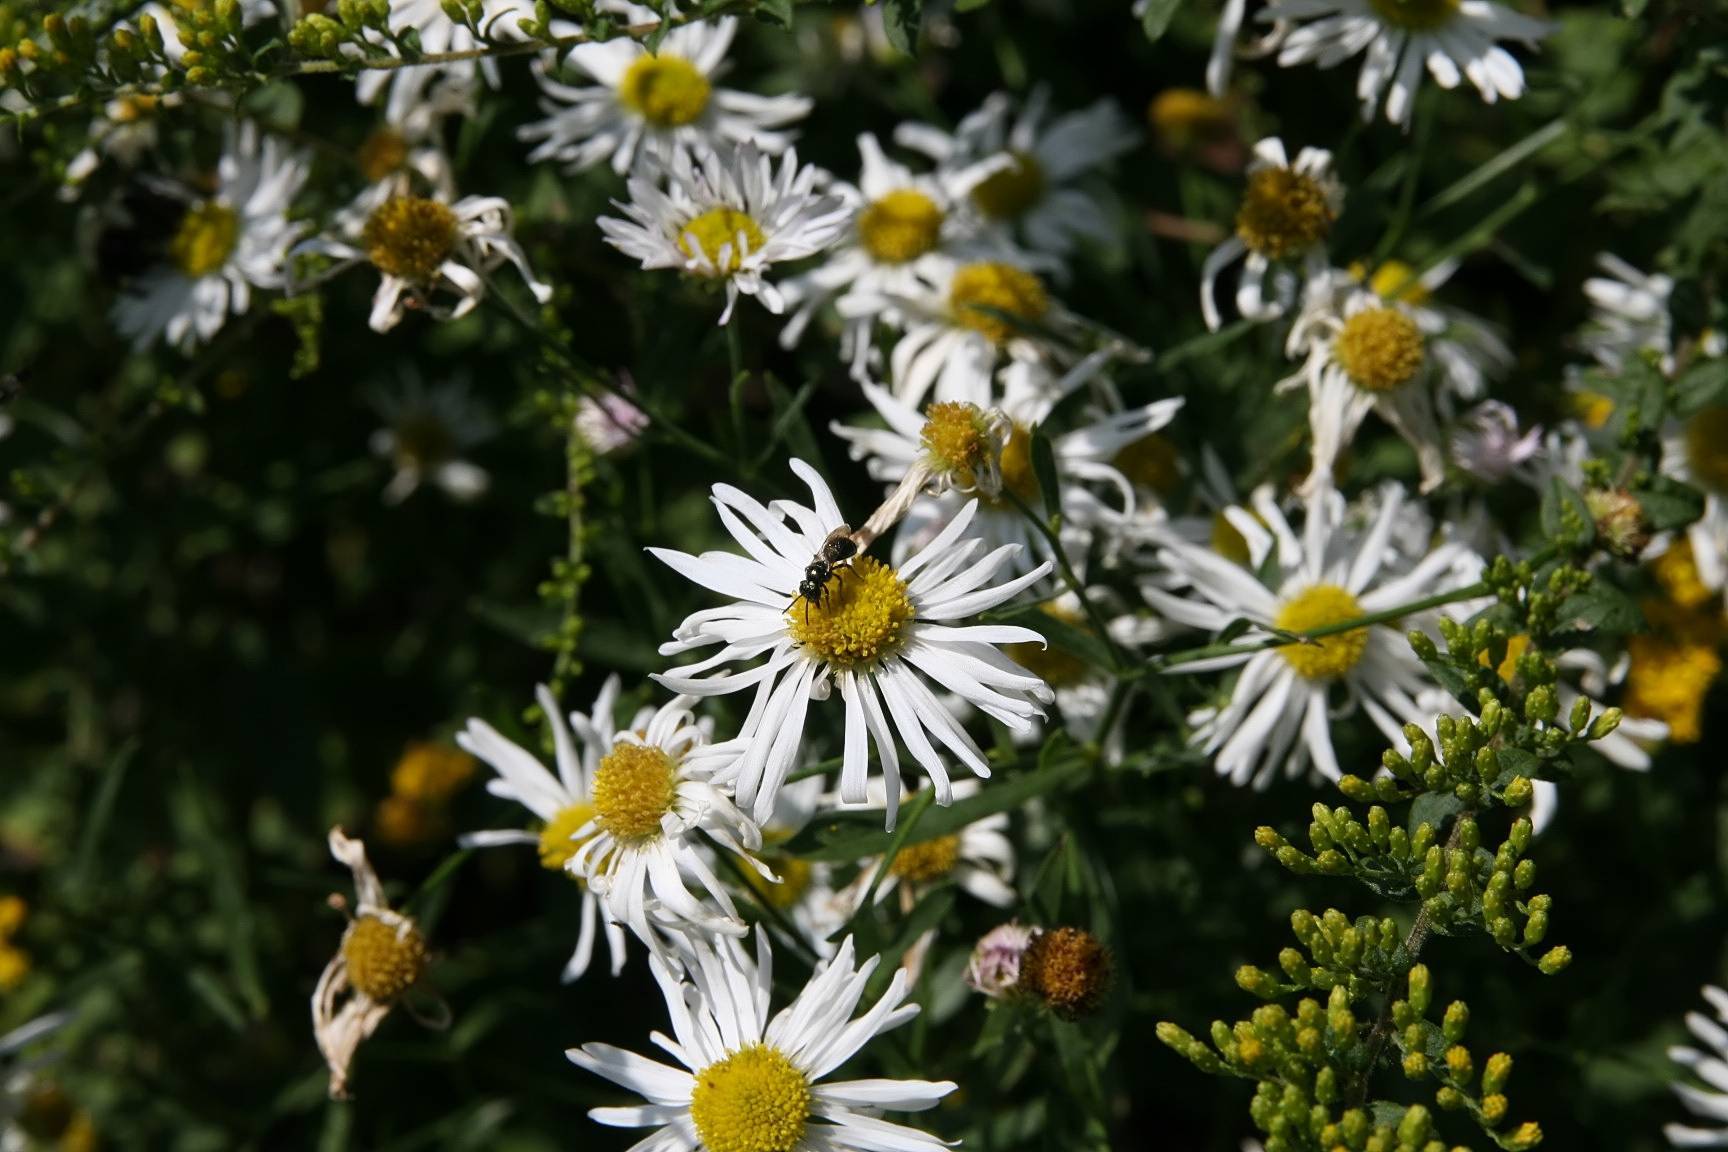 white flowers with yellow center, lime-yellow buds, green leaves and stems